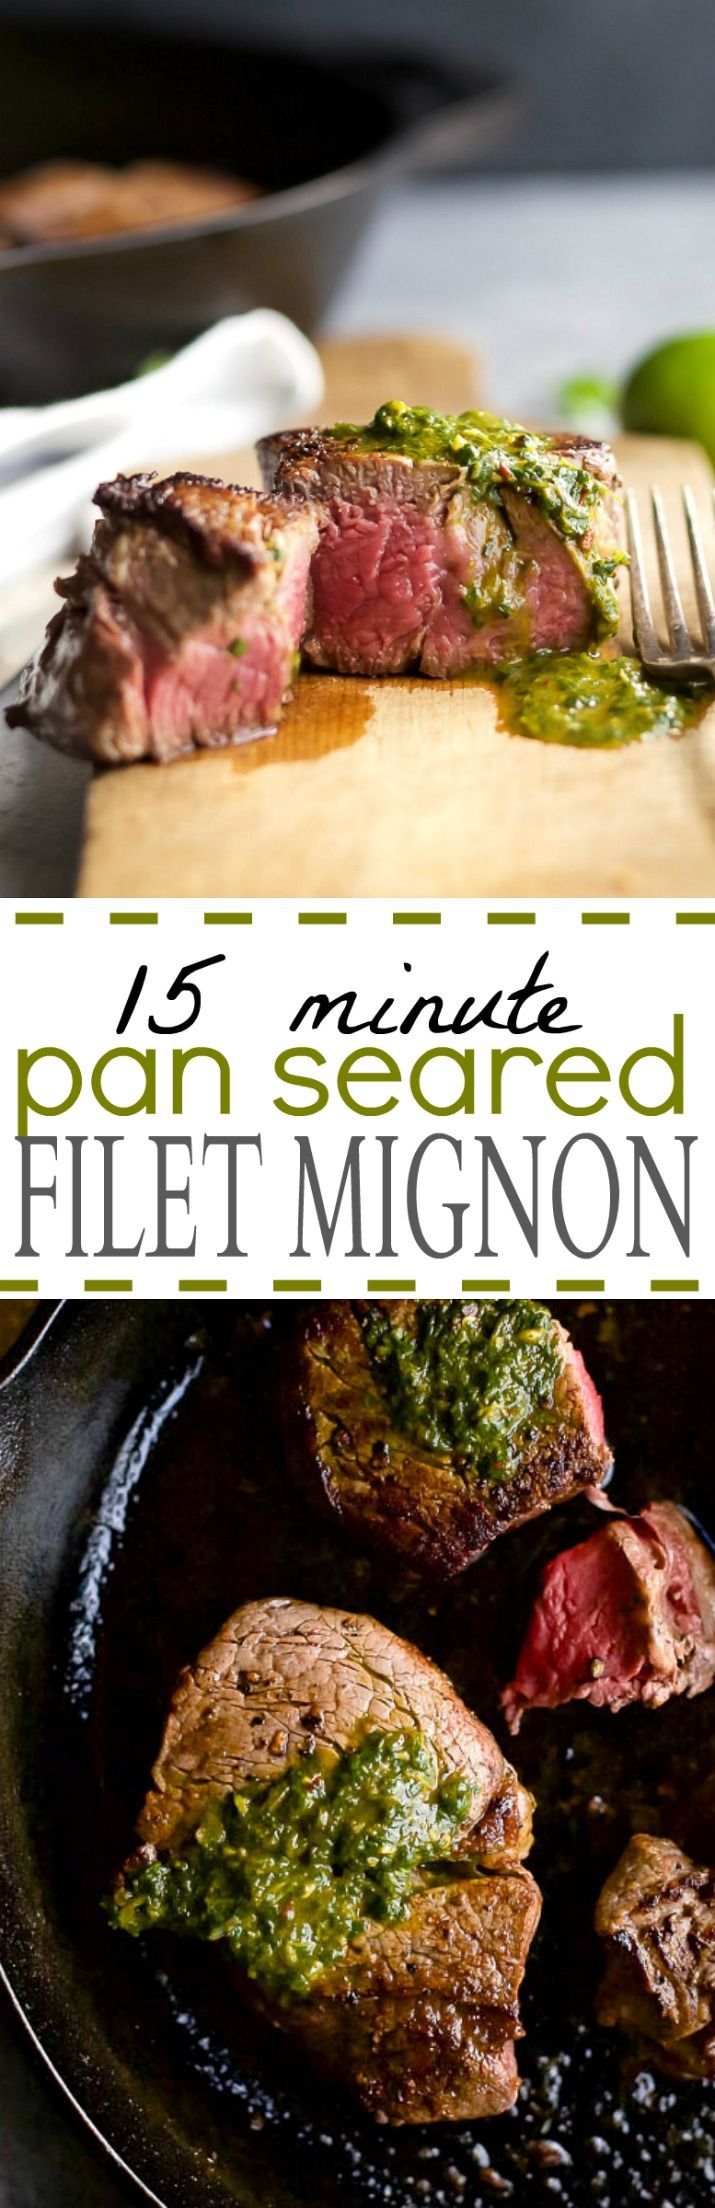 15 MINUTE PAN SEARED FILET MIGNON with a zesty CHIMICHURRI – the ultimate date night recipe. An easy recipe to make that delivers